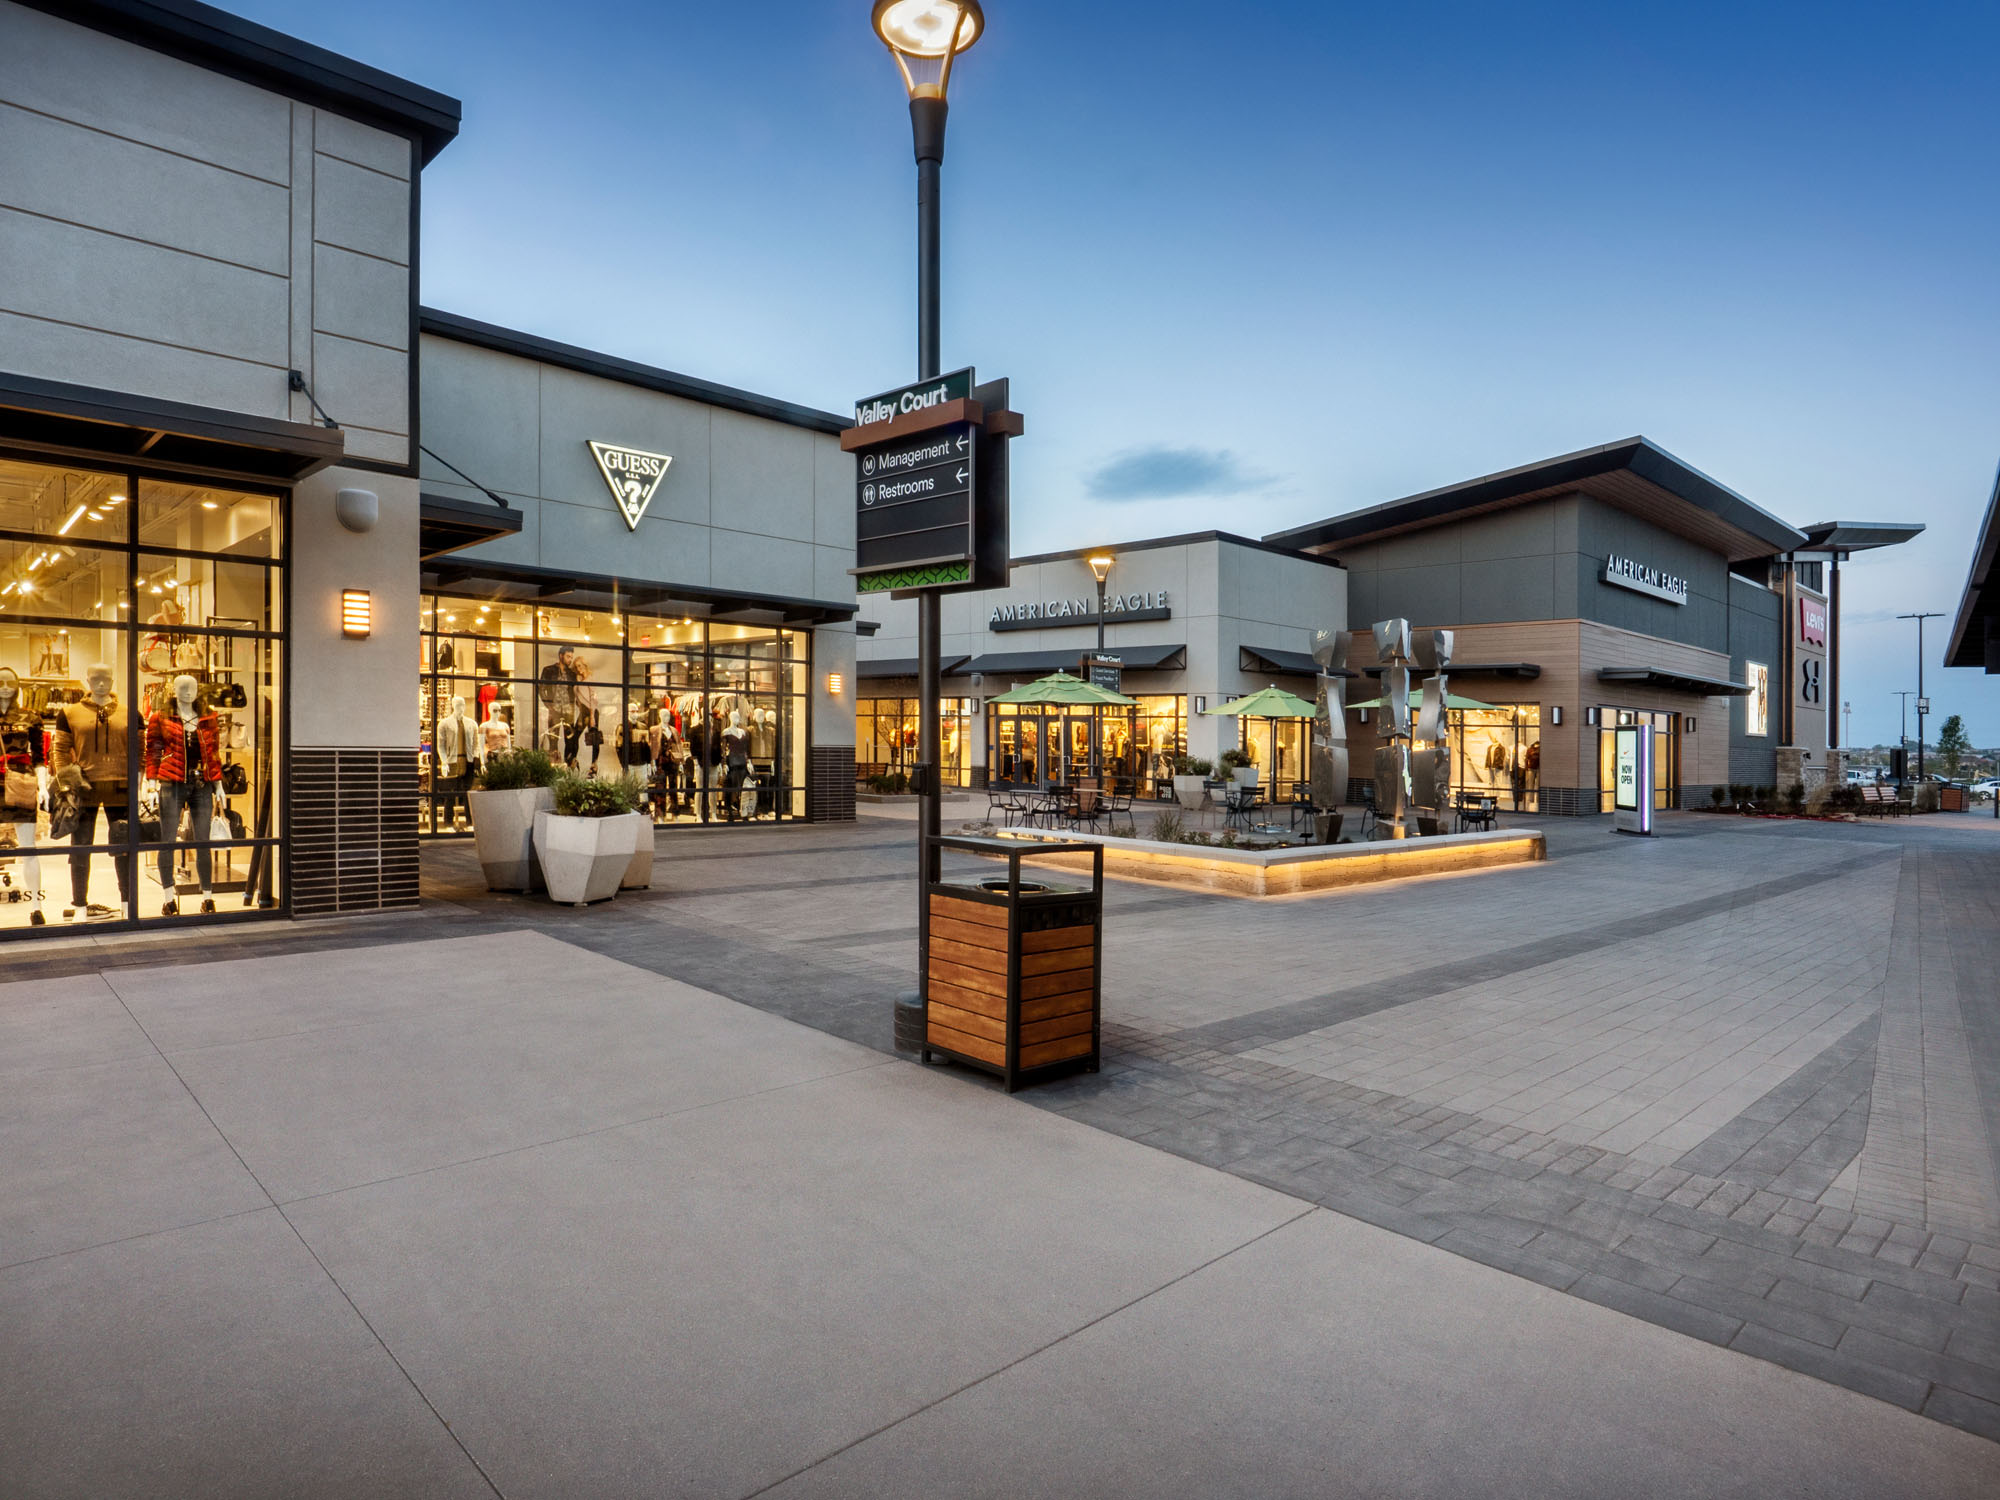 Denver Shopping Malls, Outlets, Street shopping and Destination